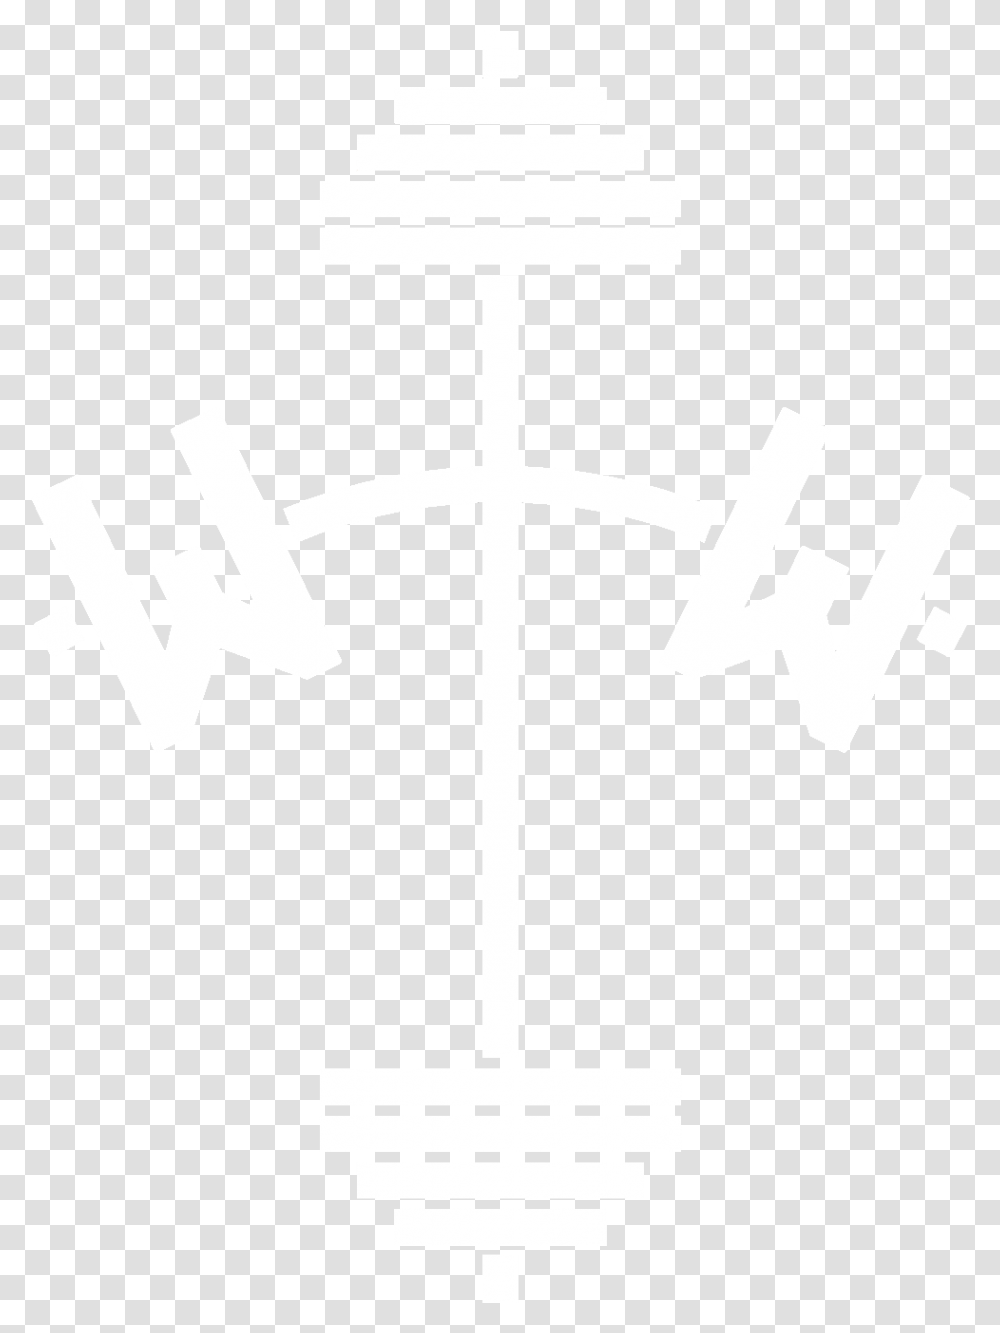 Worship Workout Graphic Design, Cross, Stencil, Silhouette Transparent Png